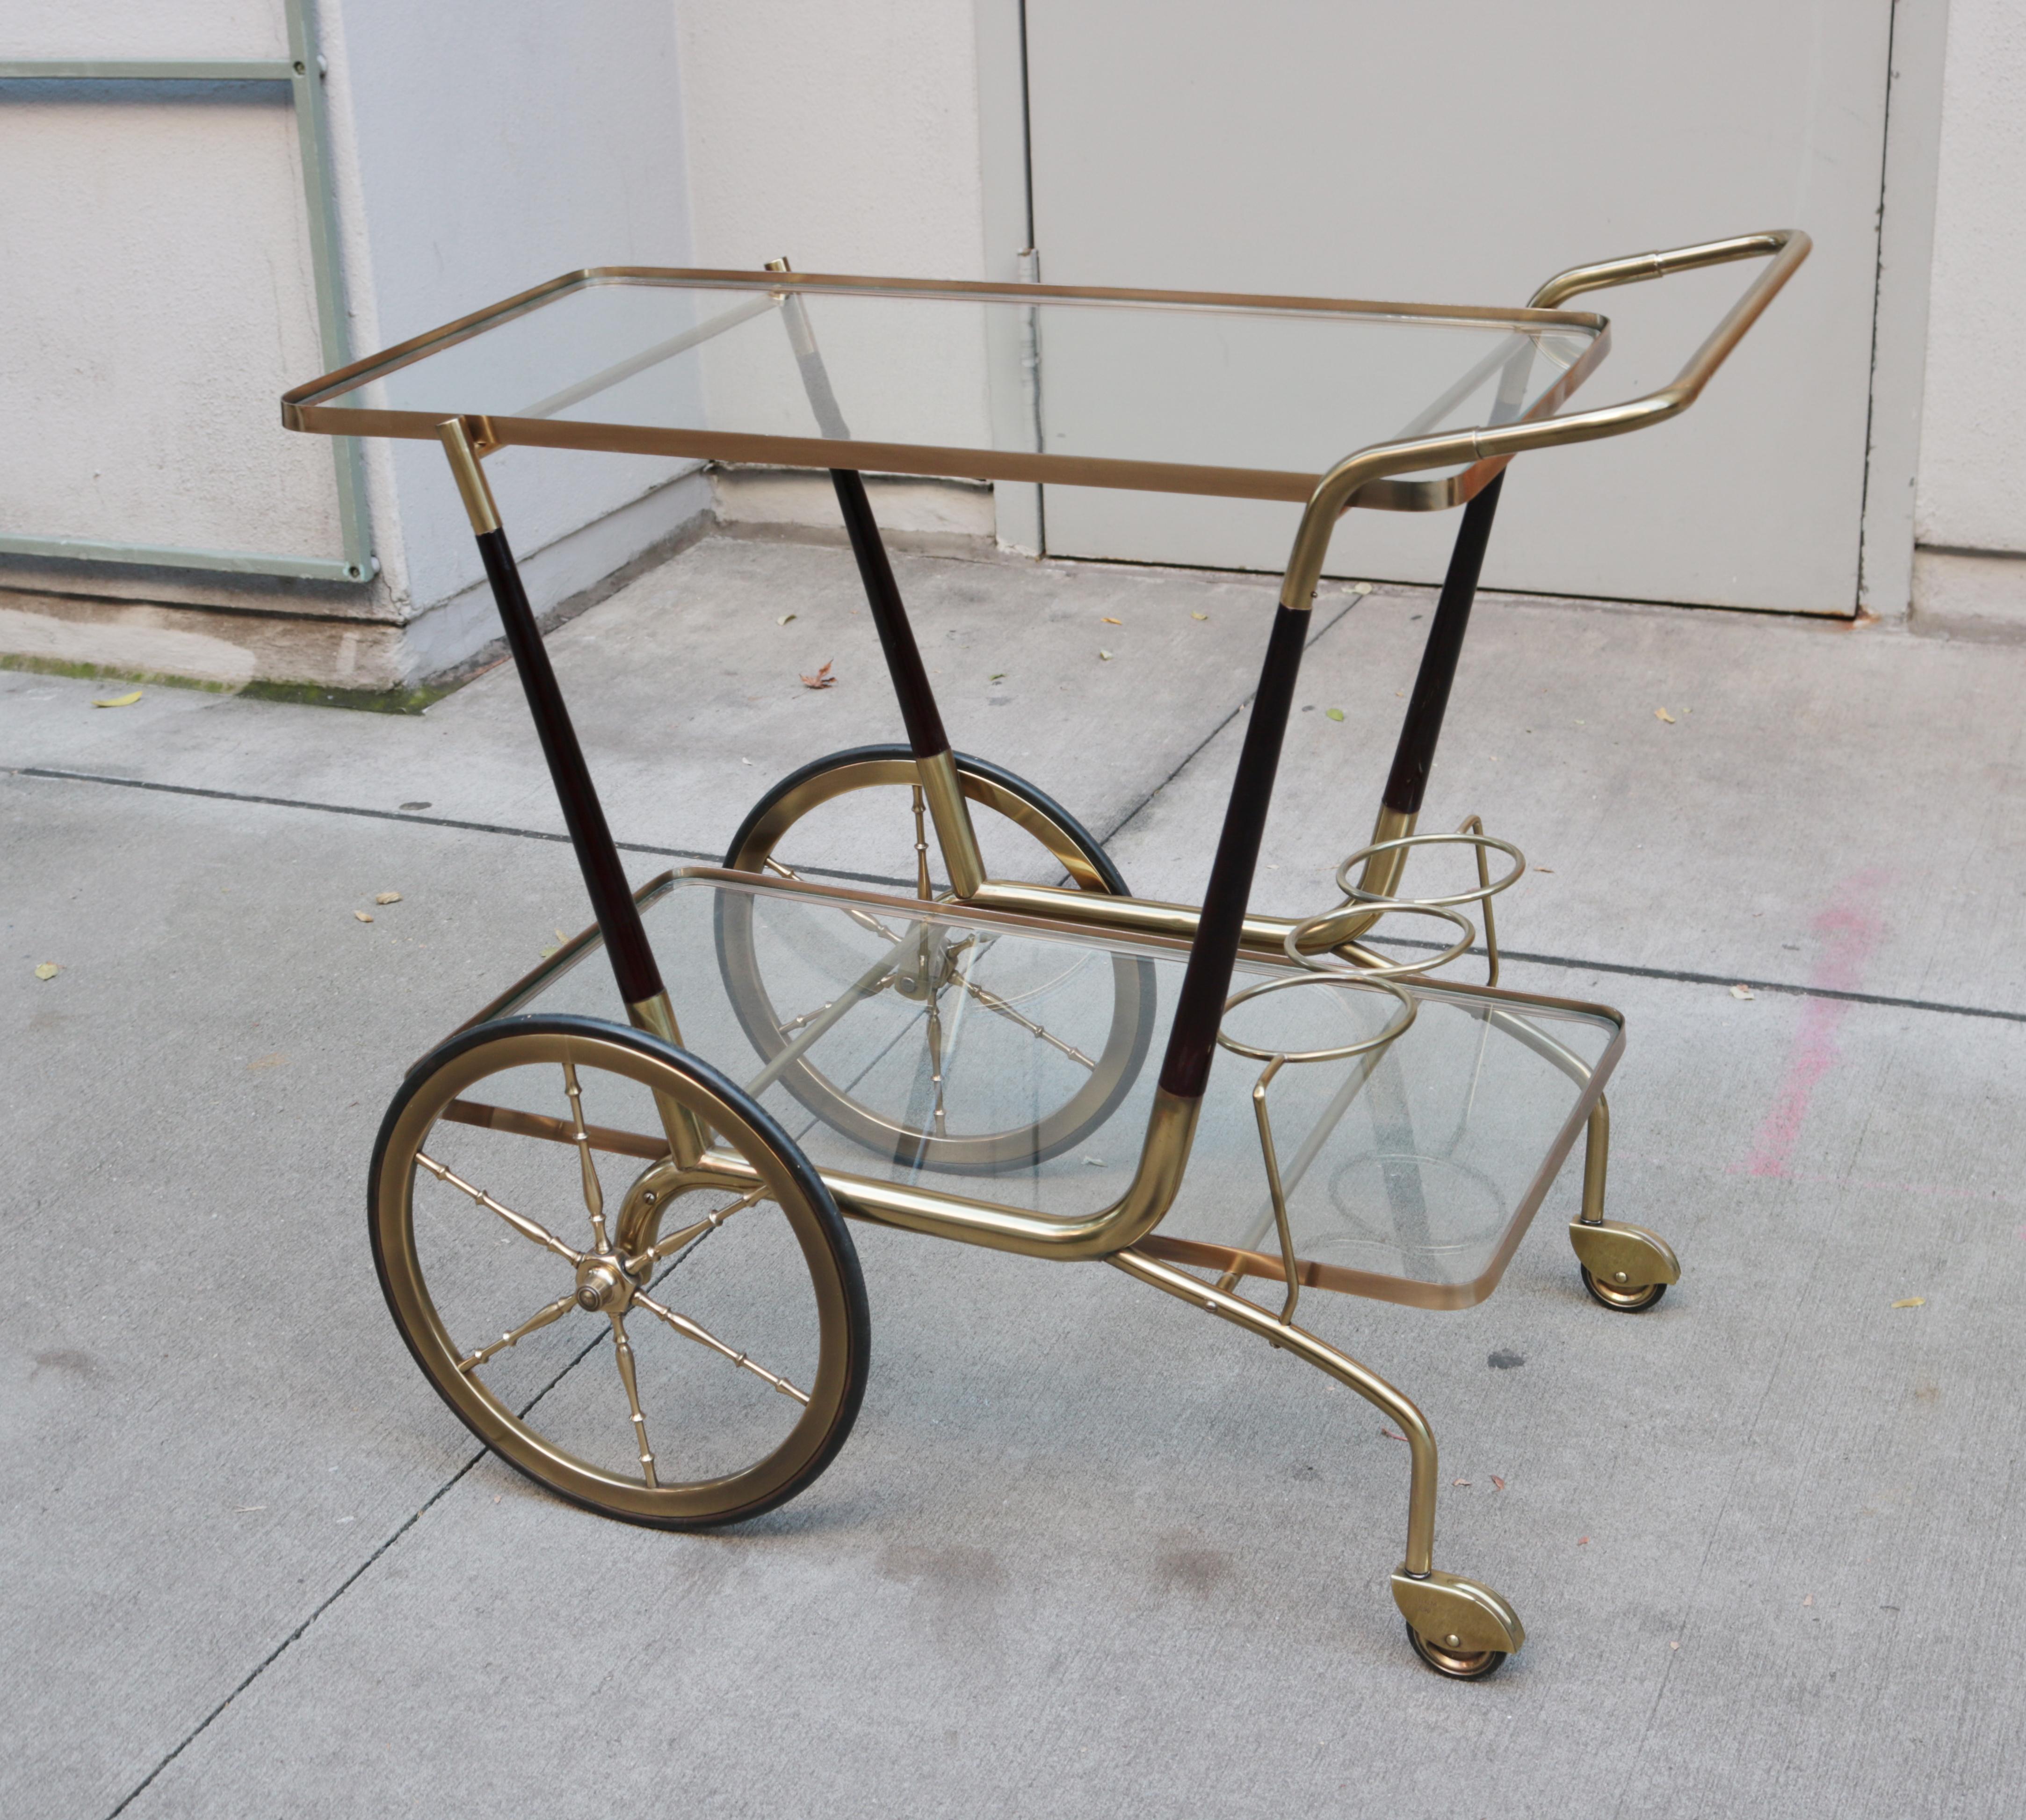 A modernist Italian bar cart. 
Brass with lacquered wood details and two glass shelves.